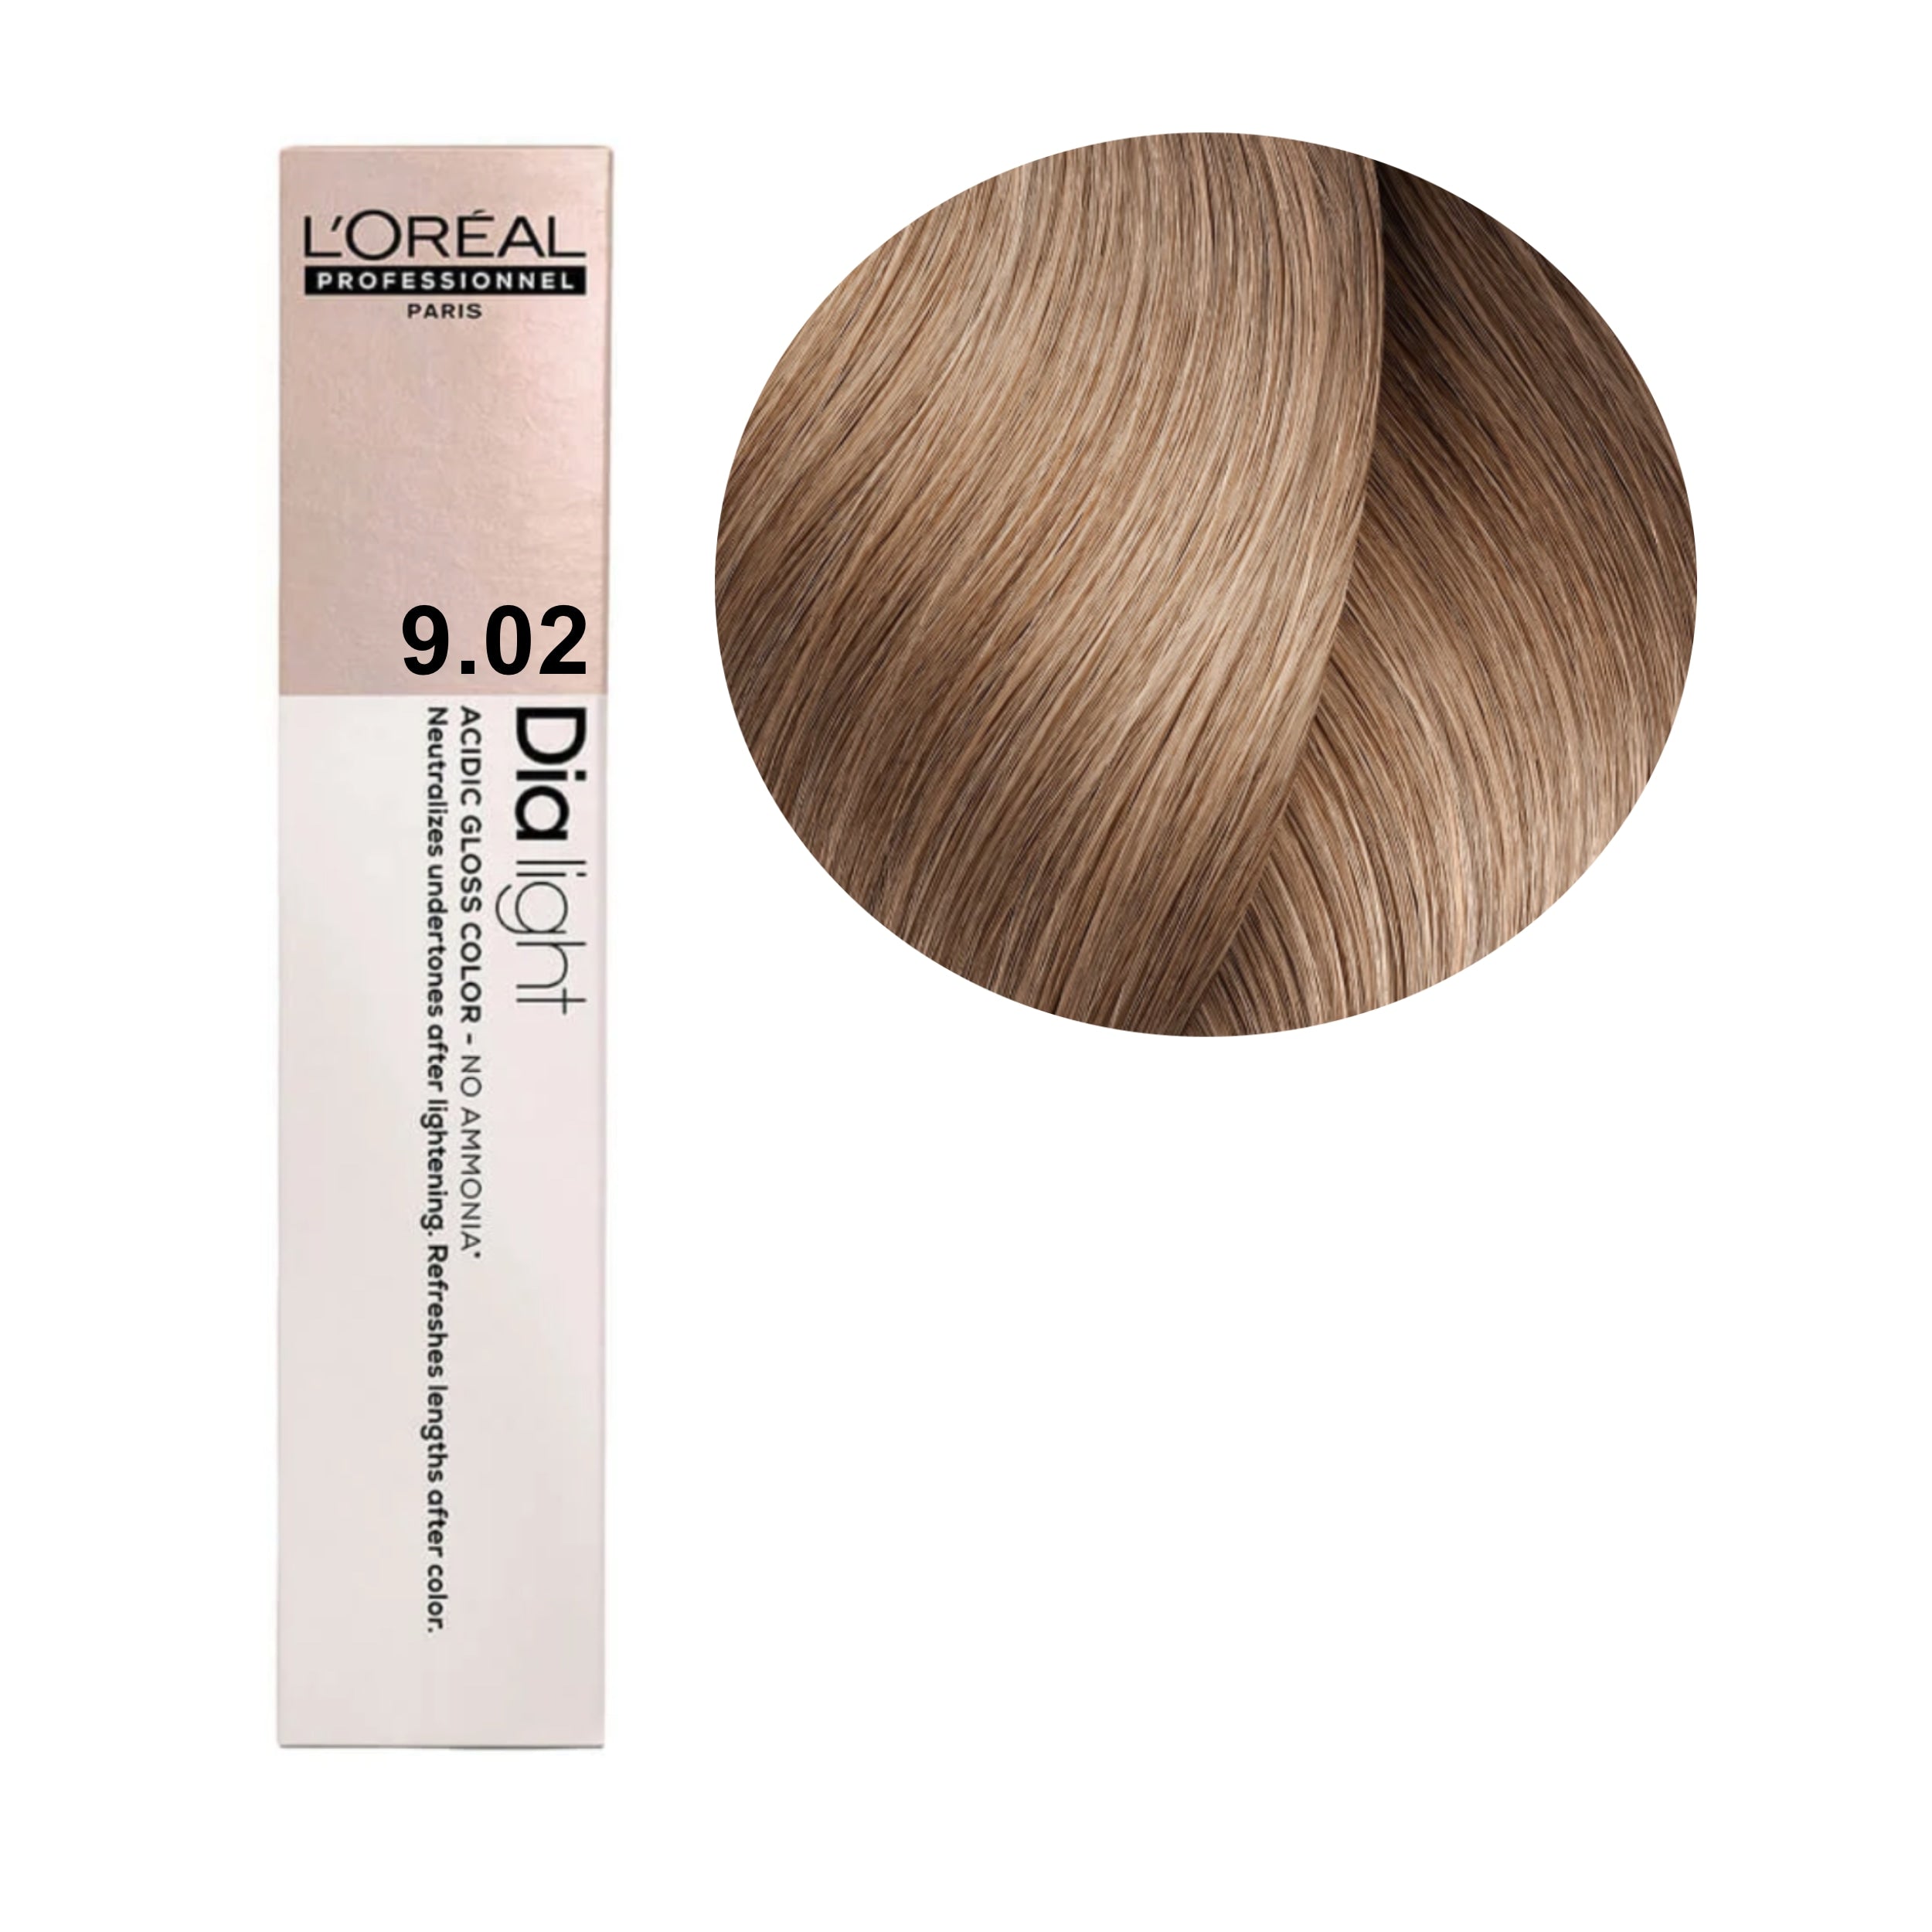 a box of lorel hair color in light blonde